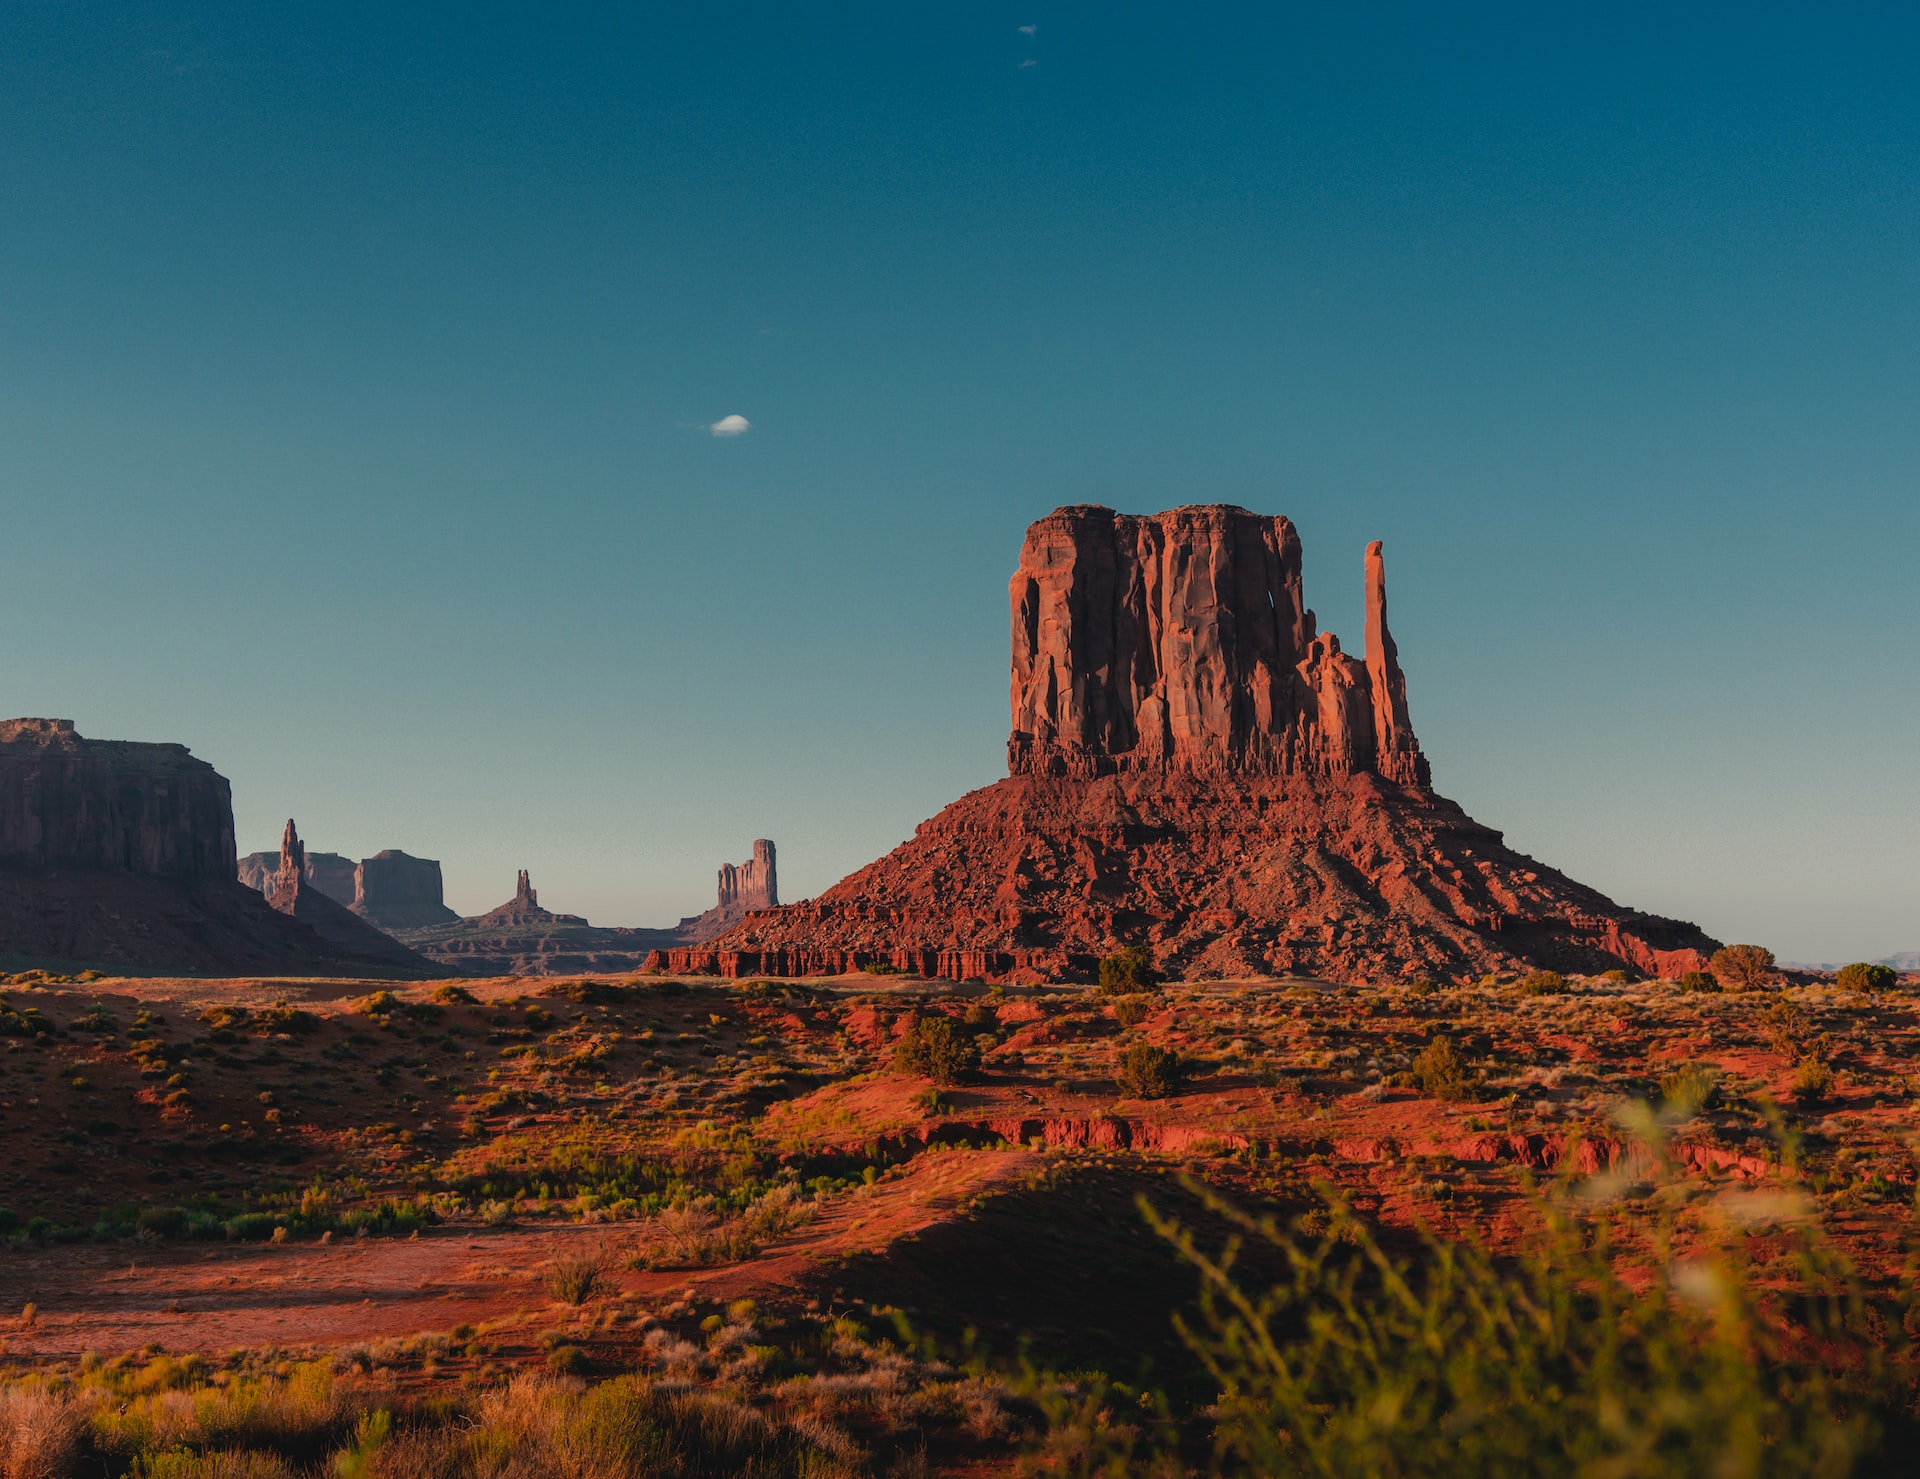 The red rock outcrops found in Monument Valley, Arizona.